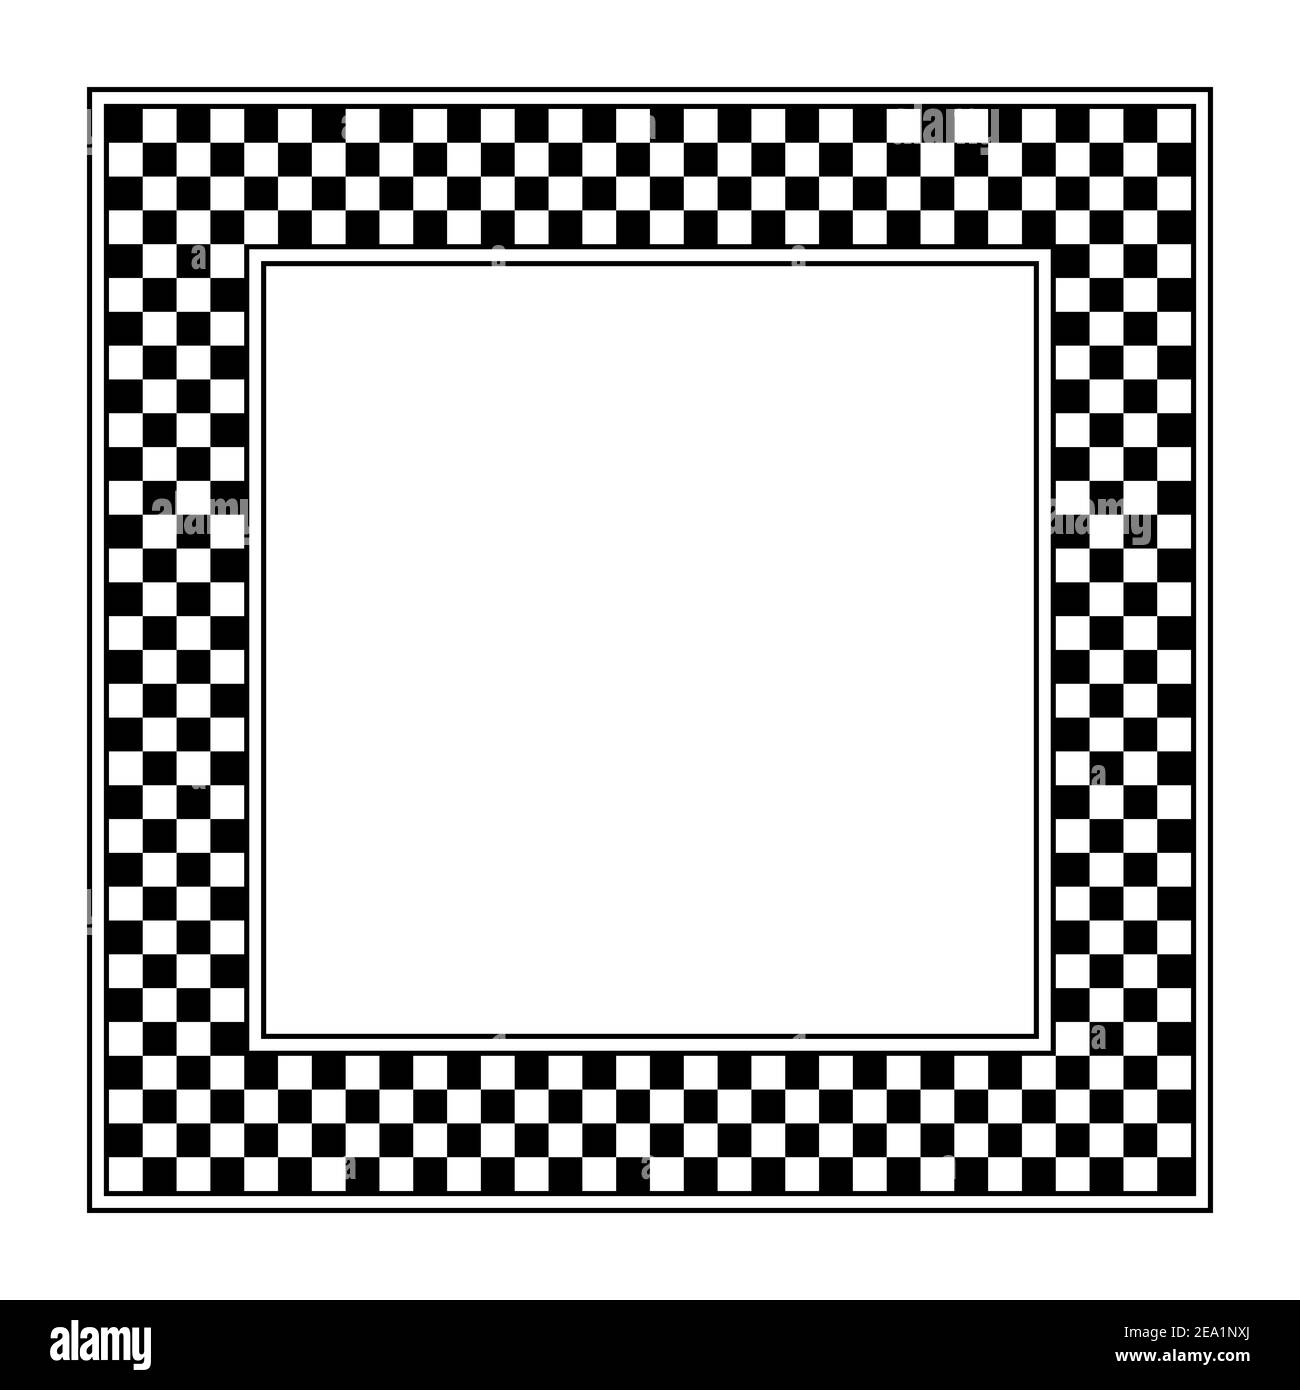 Checkerboard pattern, square frame. A checkered pattern frame, made of a checkerboard diagram consisting of black and white alternating squares, frame Stock Photo